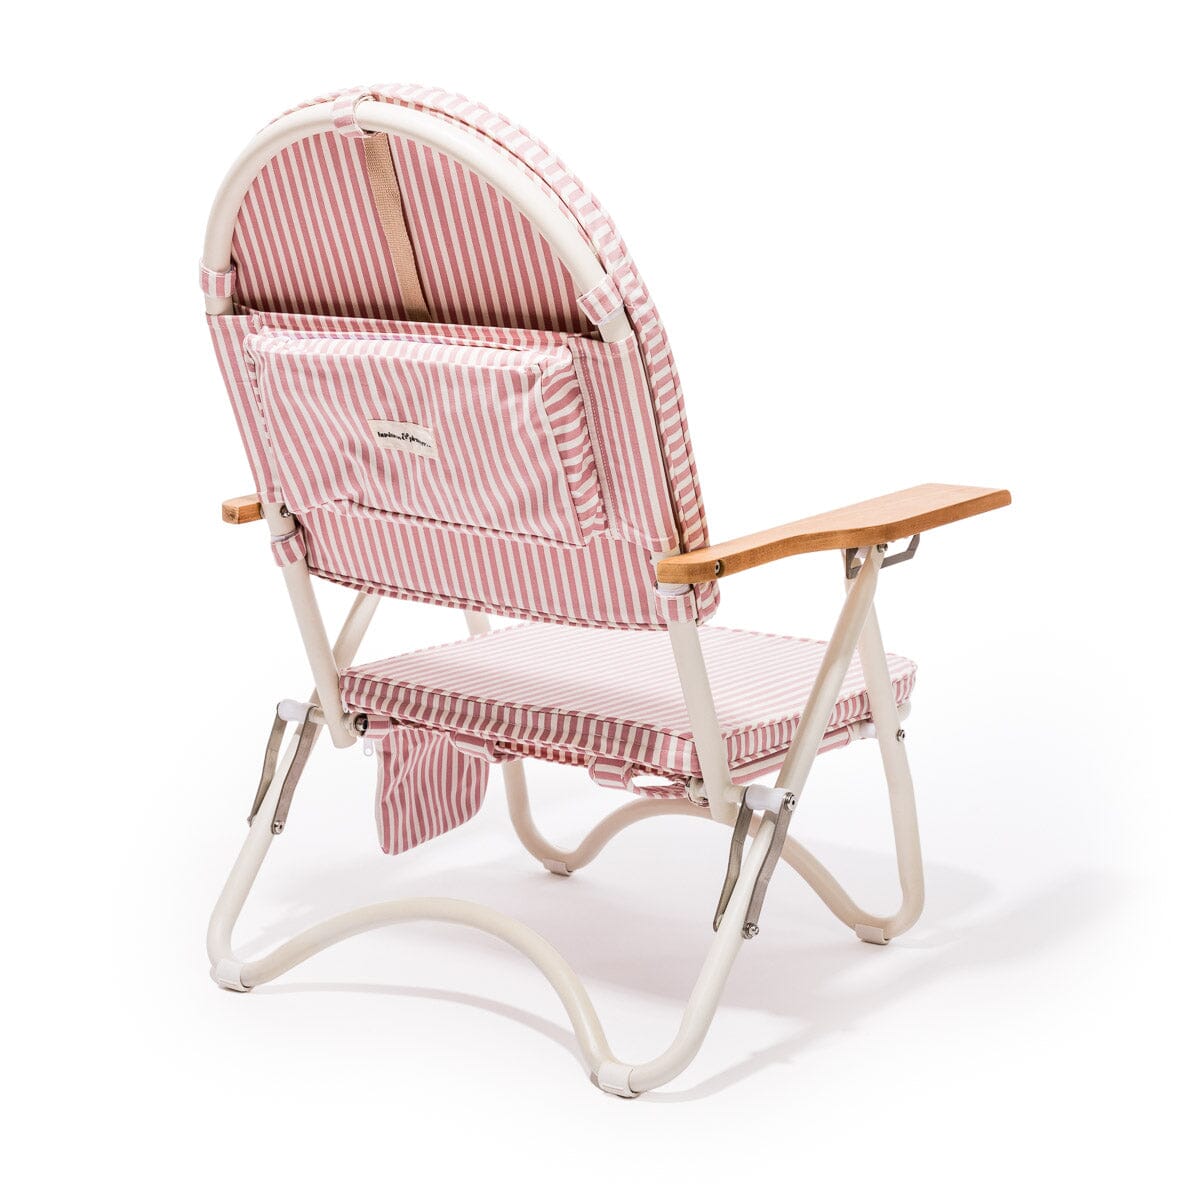 The Pam Chair - Laurens Pink Stripe Pam Chair Business & Pleasure Co 